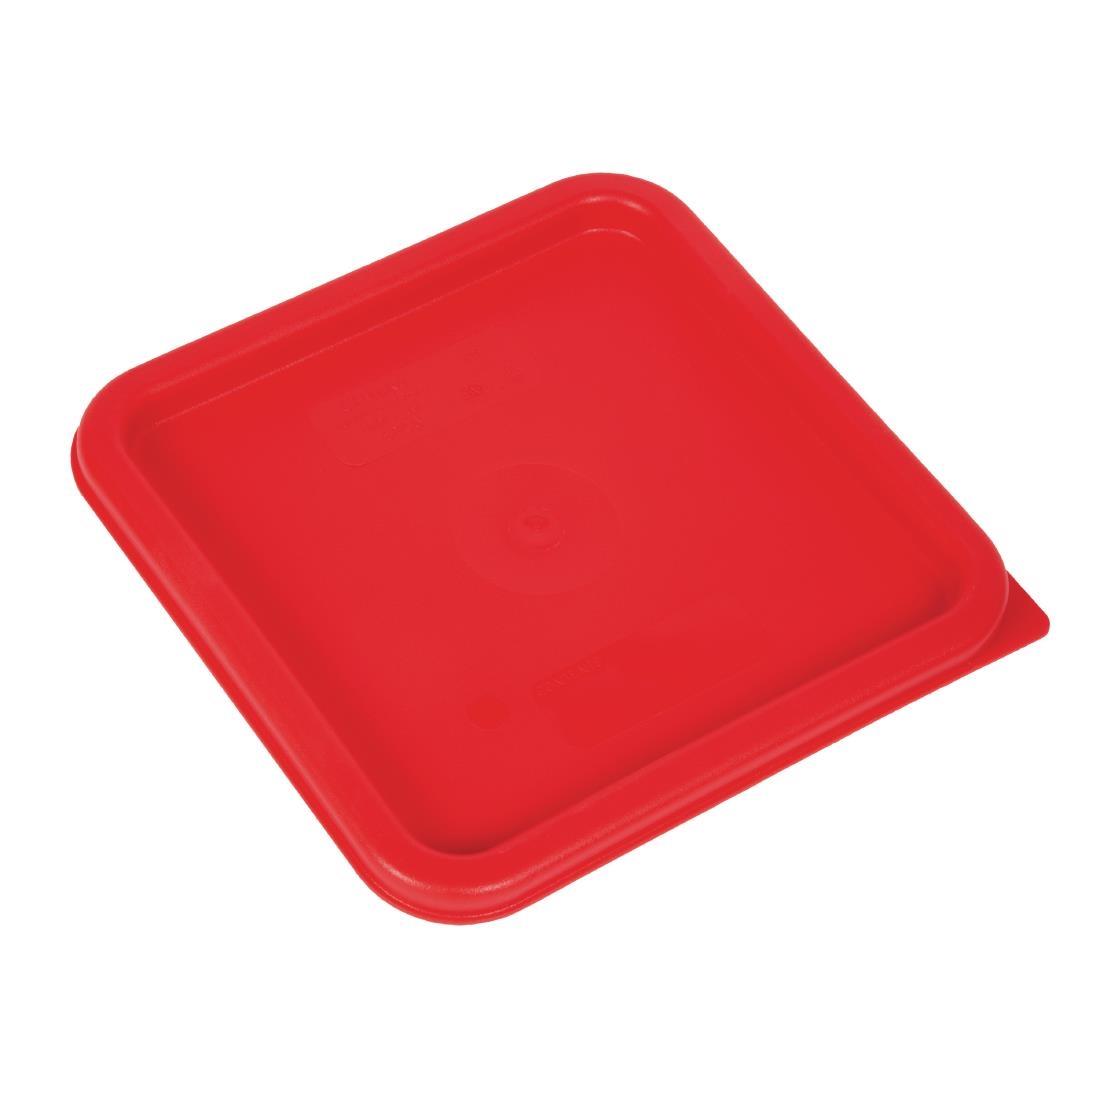 Cambro Camsquare Food Storage Container Lid Red - DB015  - 4